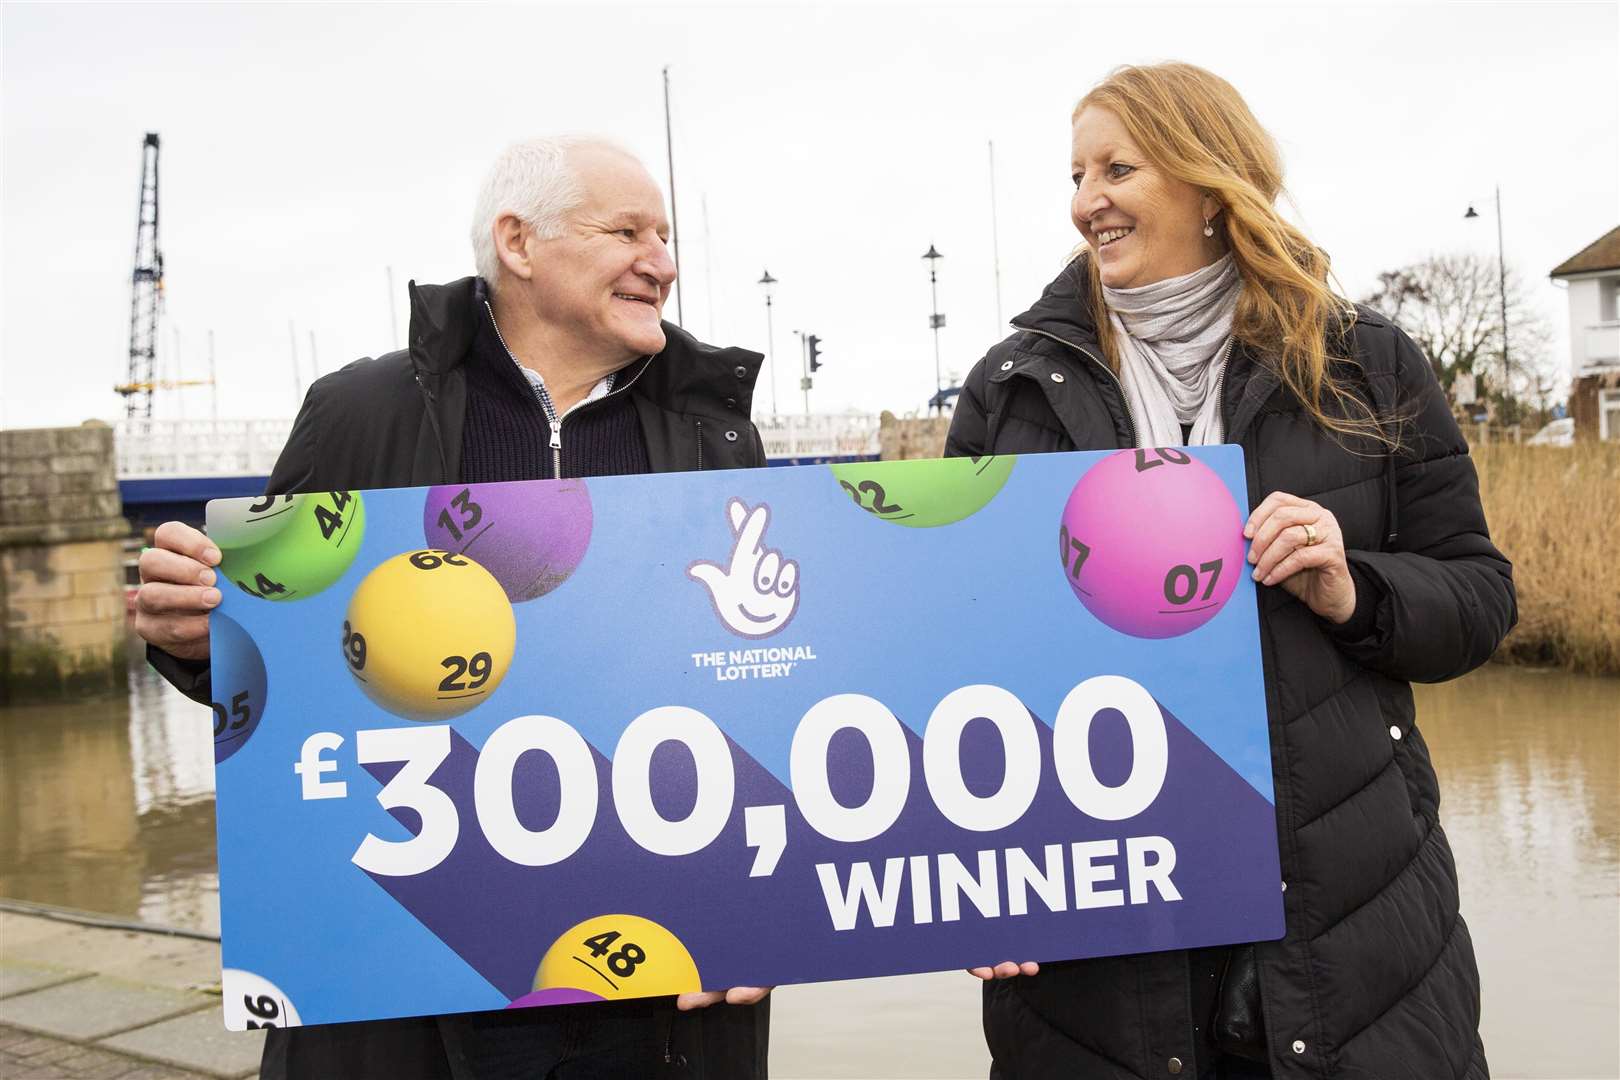 The couple 'burst into tears' after discovering they had won. Picture: James Robinson/Camelot